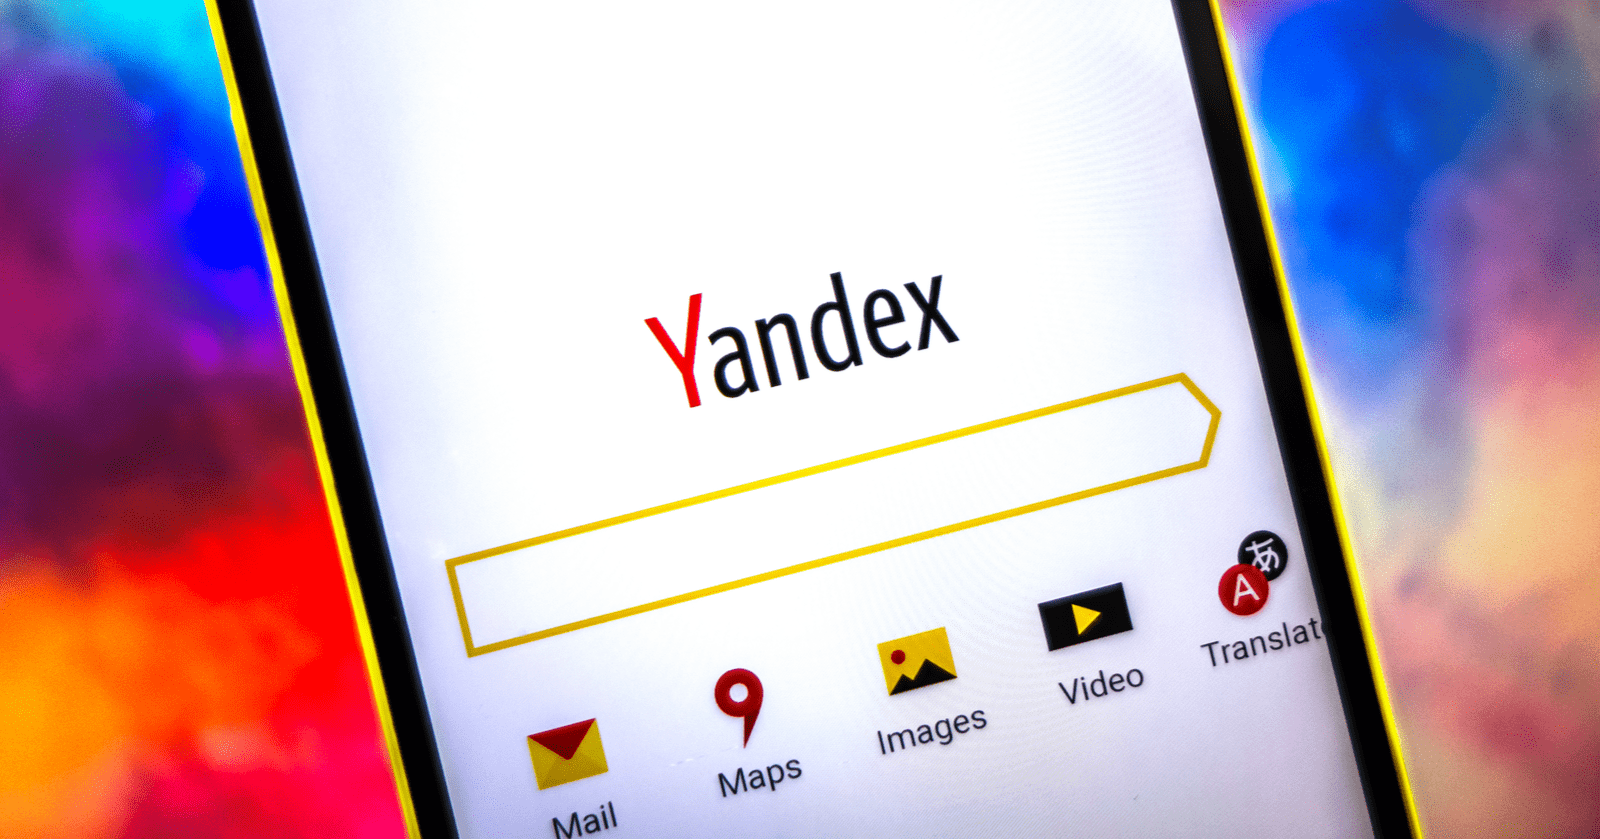 Yandex Images: How It Is Used And How It Differs From Google Images